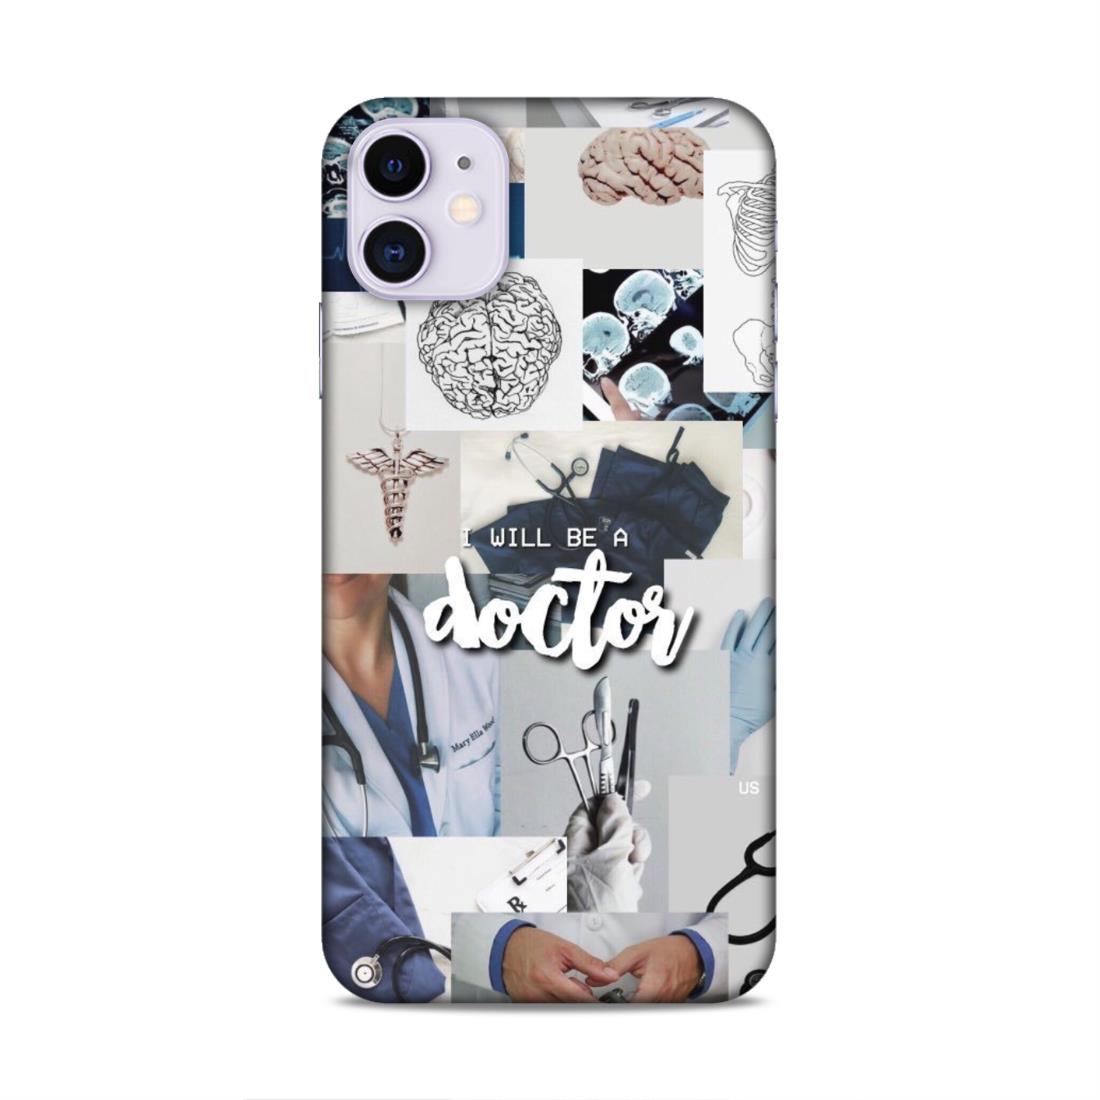 Will Be a Doctor Hard Back Case For Apple iPhone 11